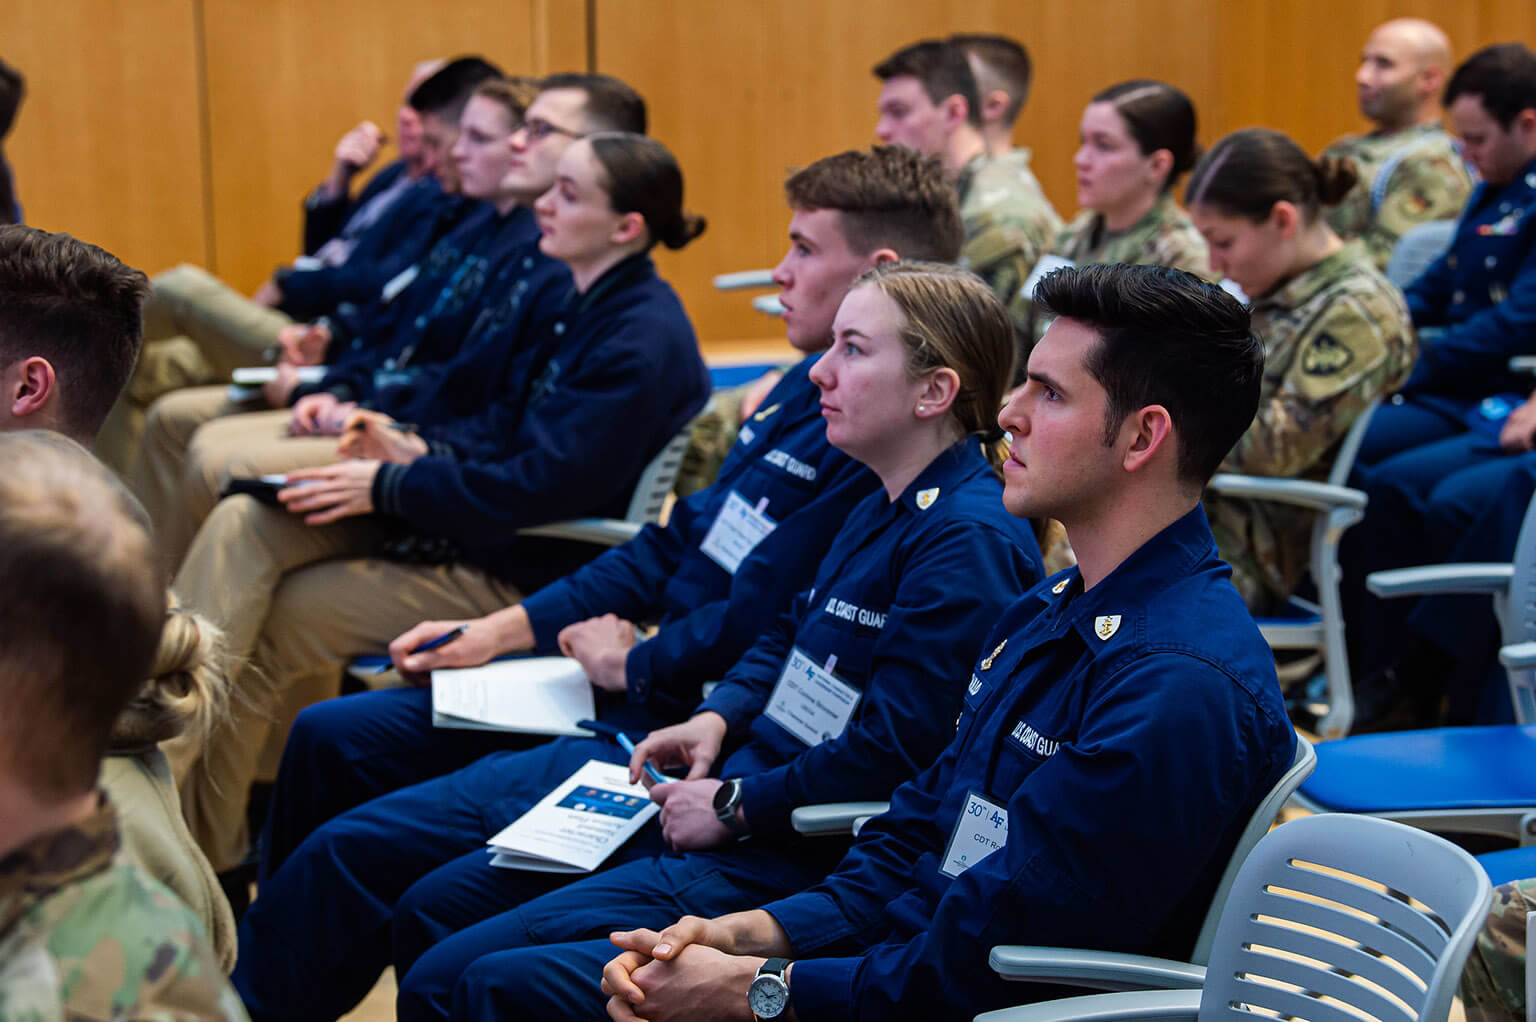 Cadets at Service academy Character Summit